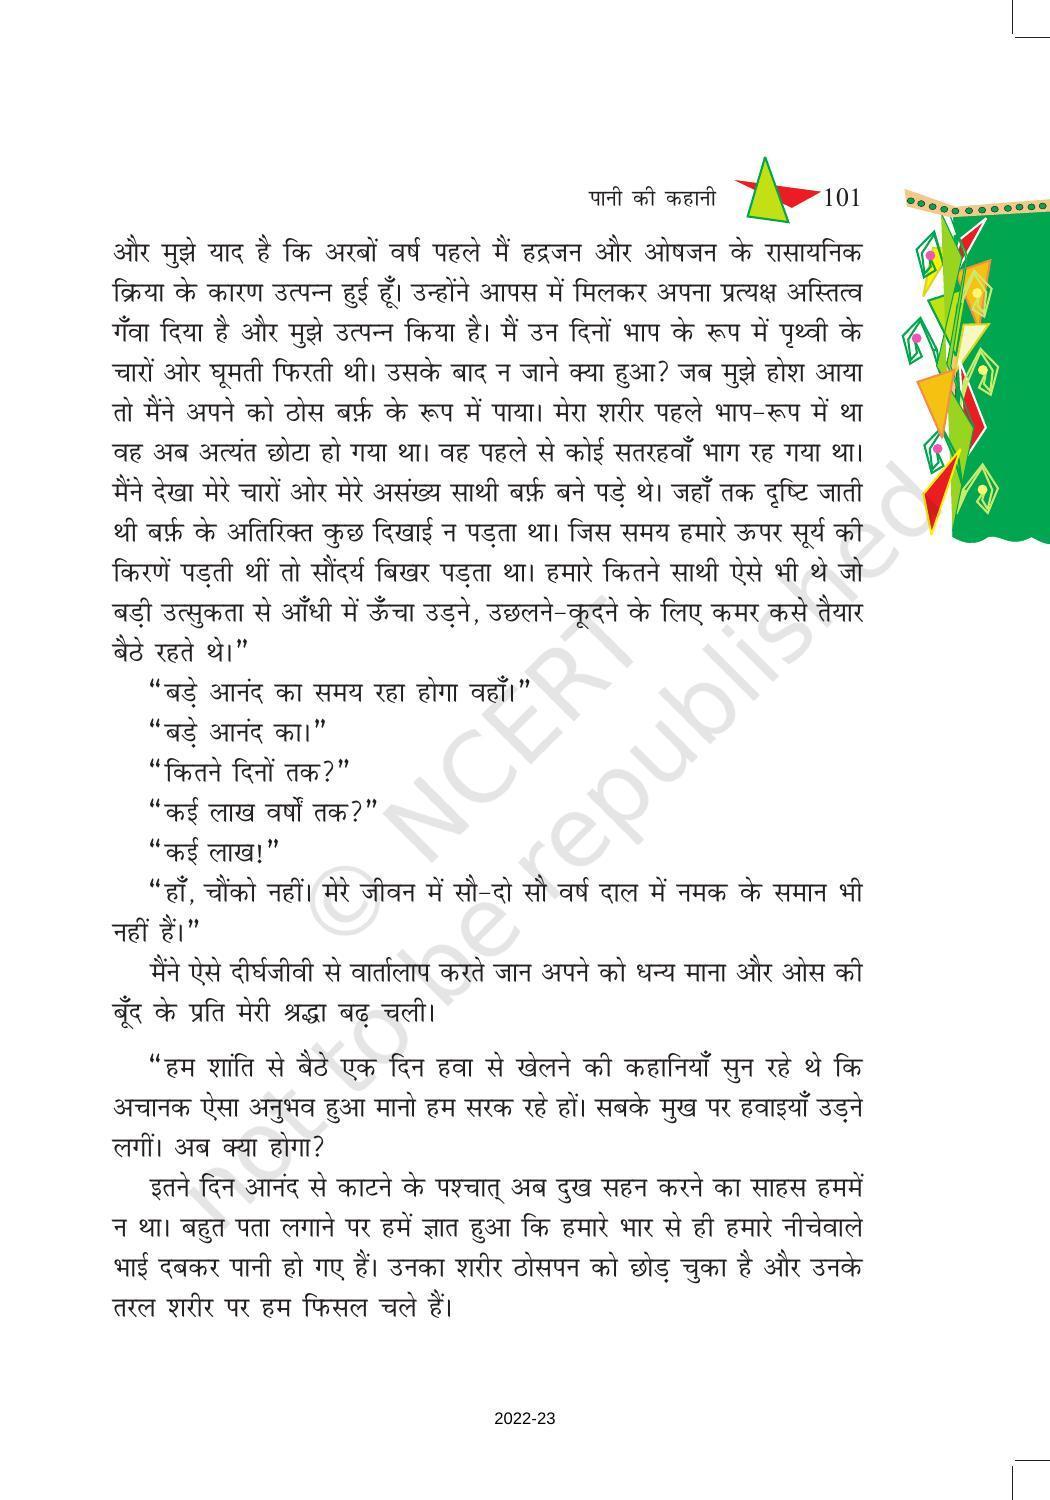 NCERT Book for Class 8 Hindi Vasant Chapter 16 पानी की कहानी - Page 4